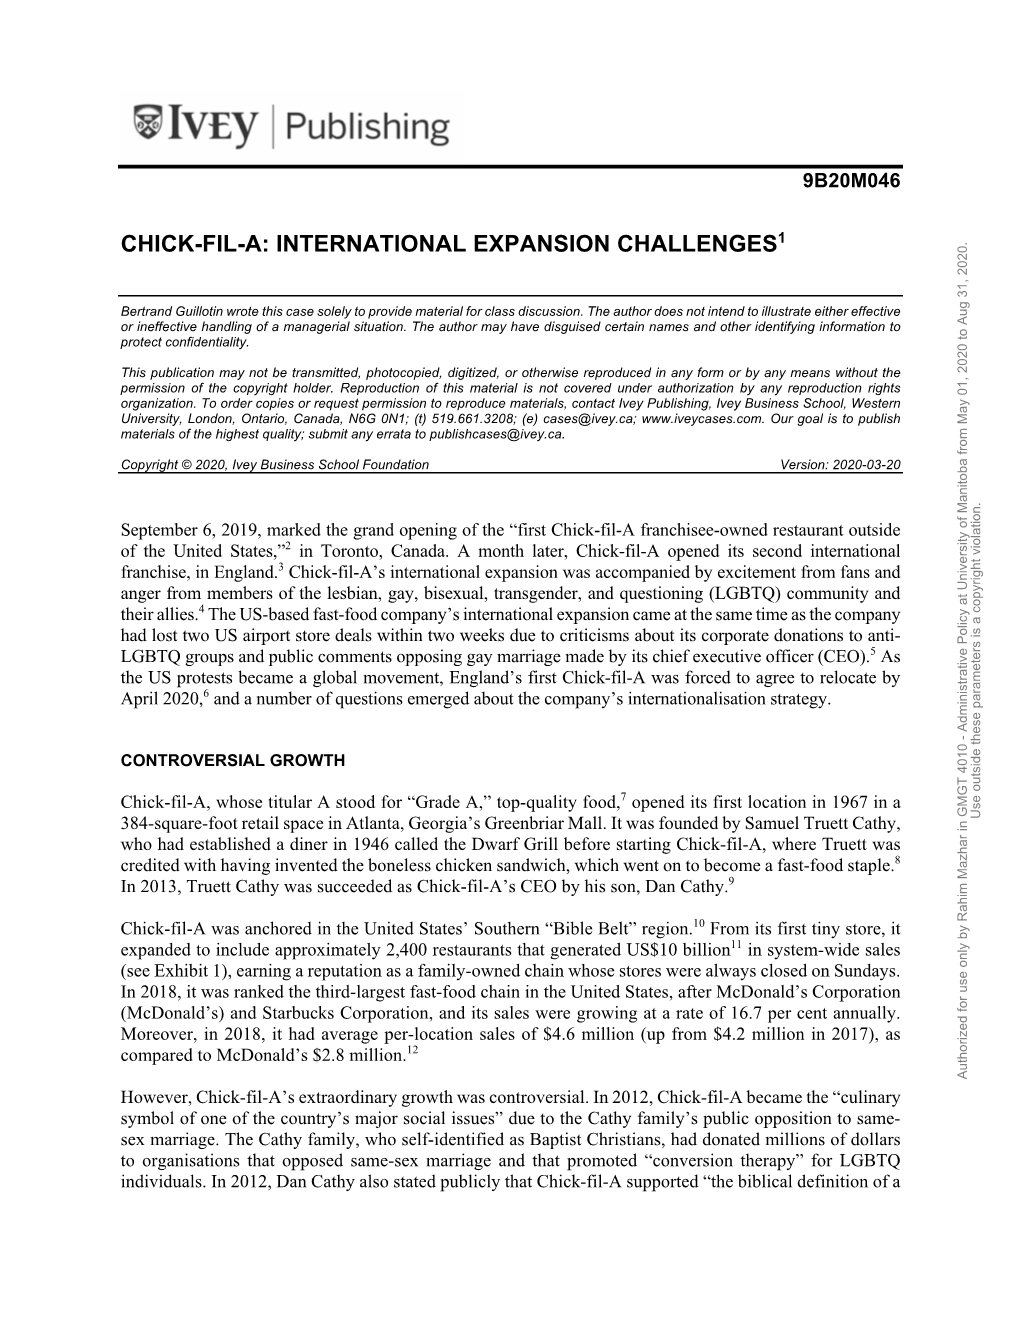 Chick-Fil-A: International Expansion Challenges1